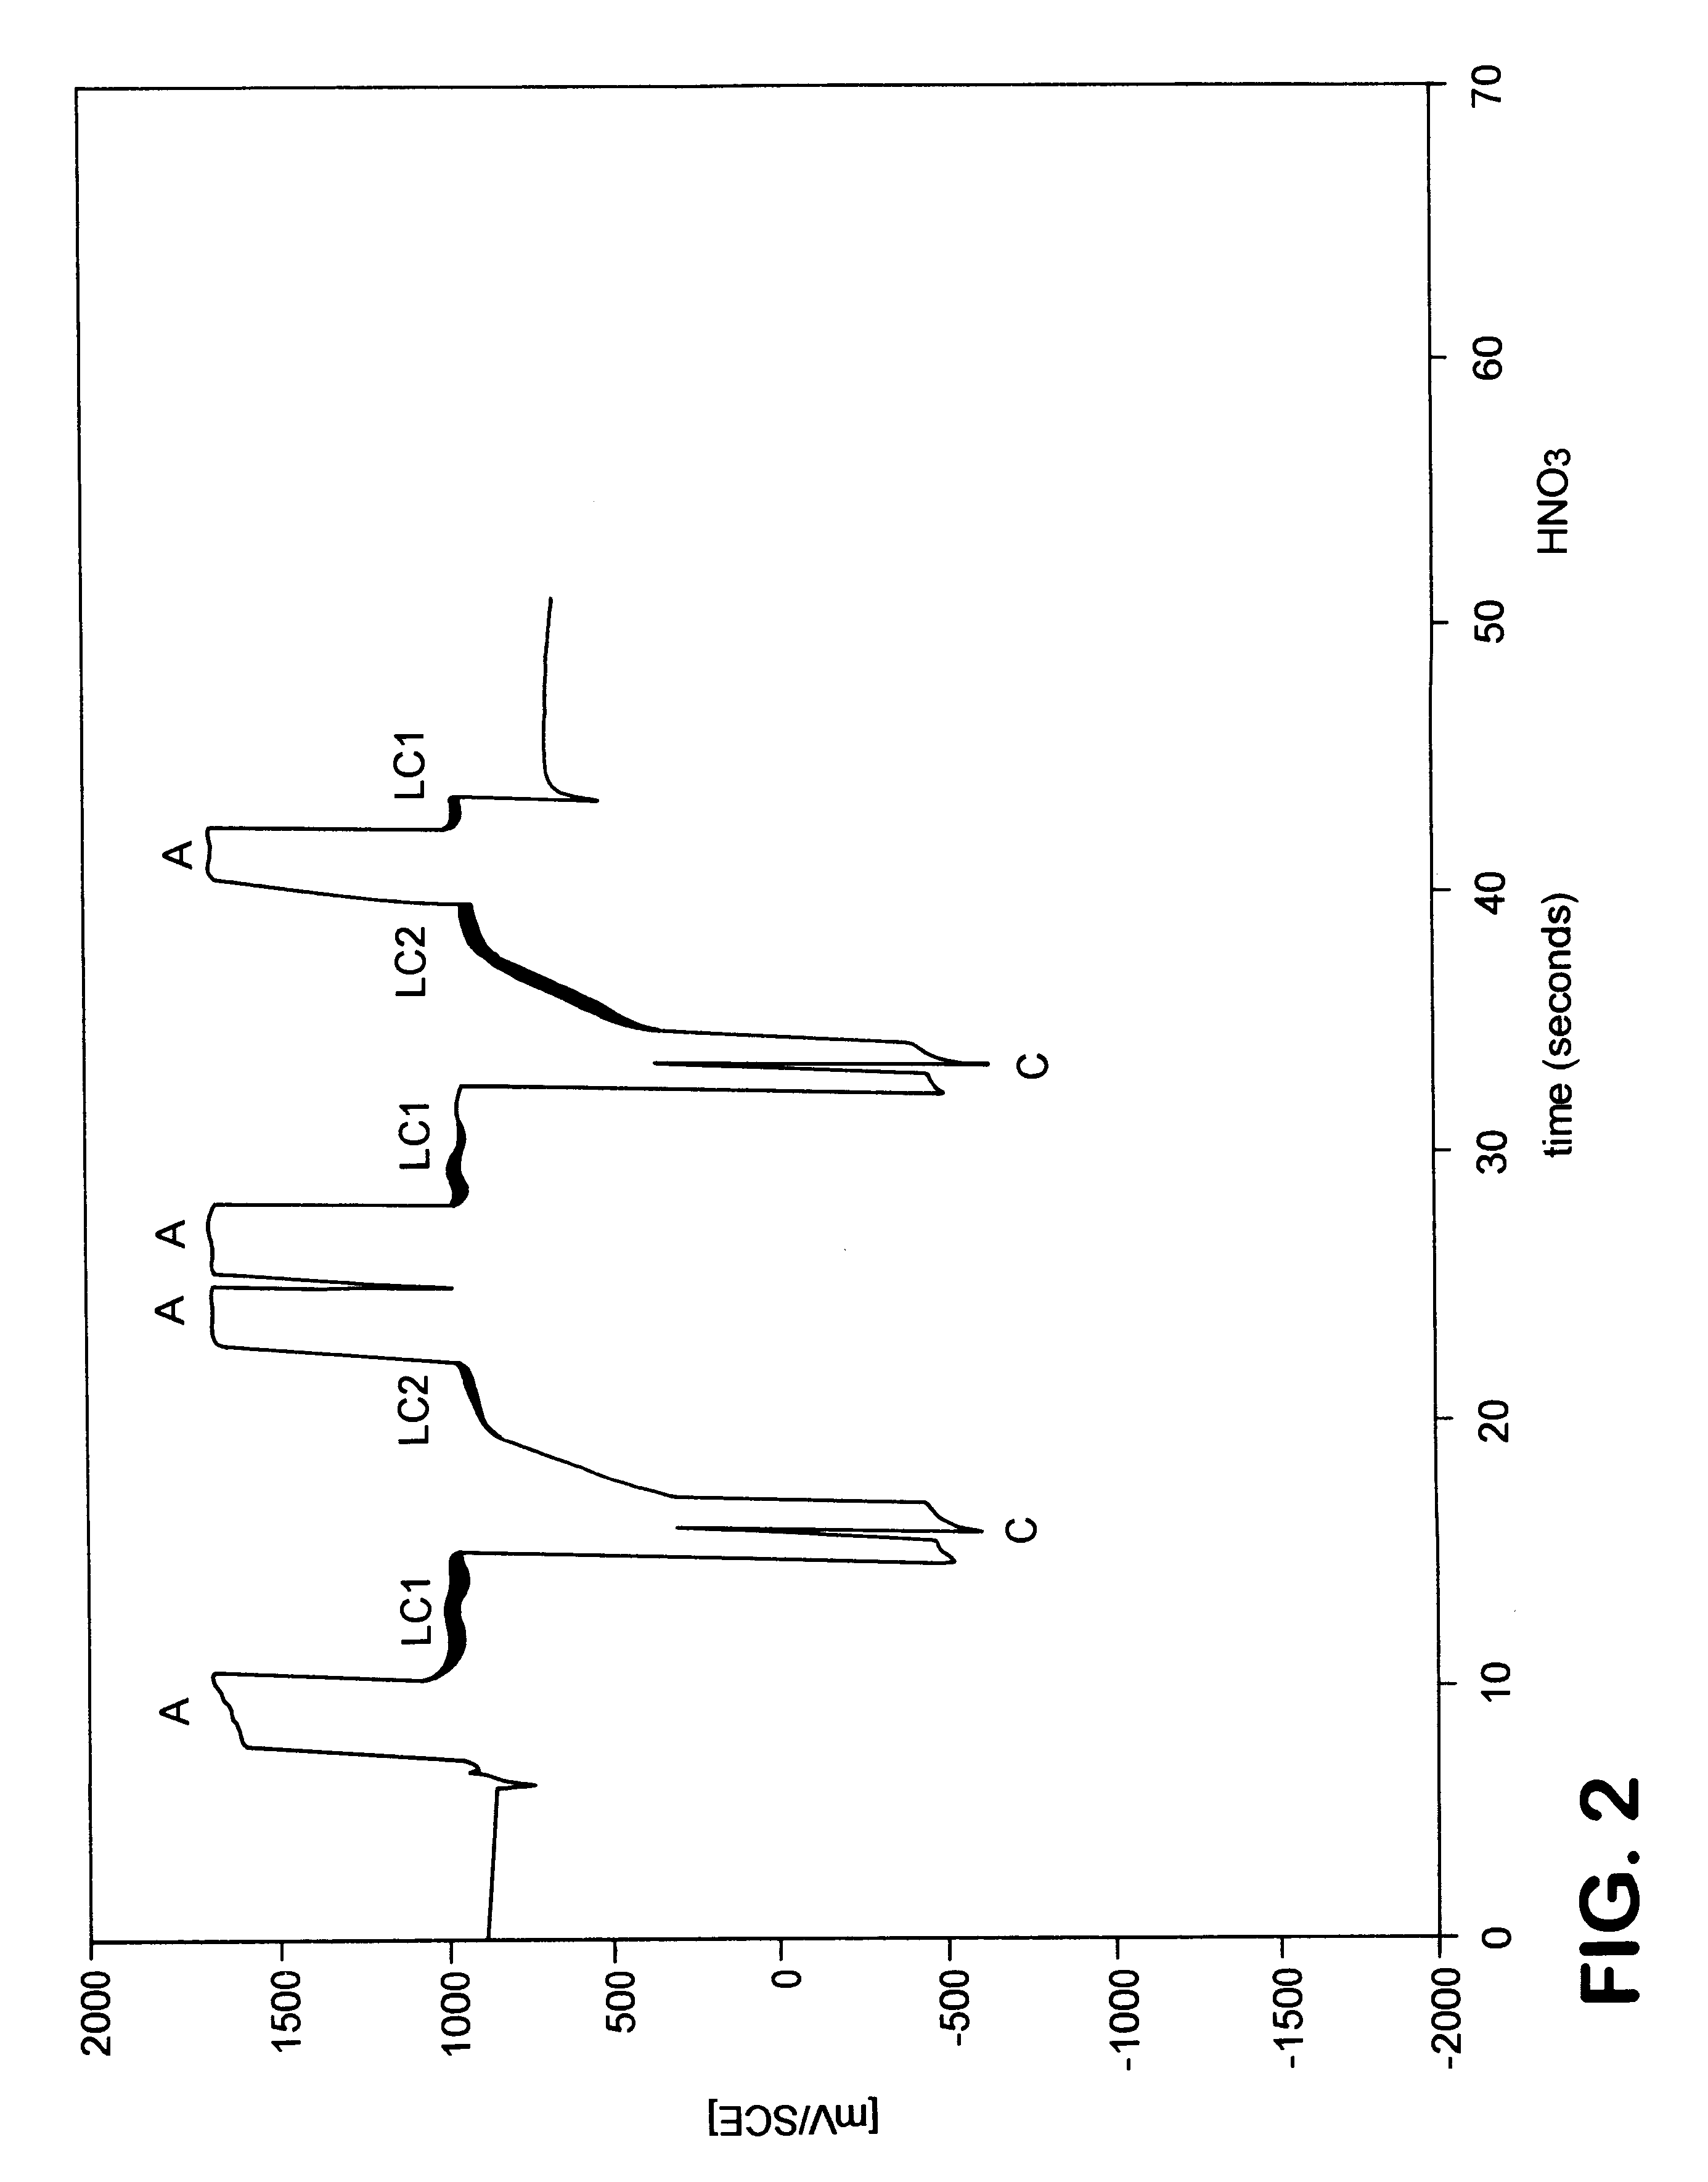 Process for electrolytic pickling using nitric acid-free solutions